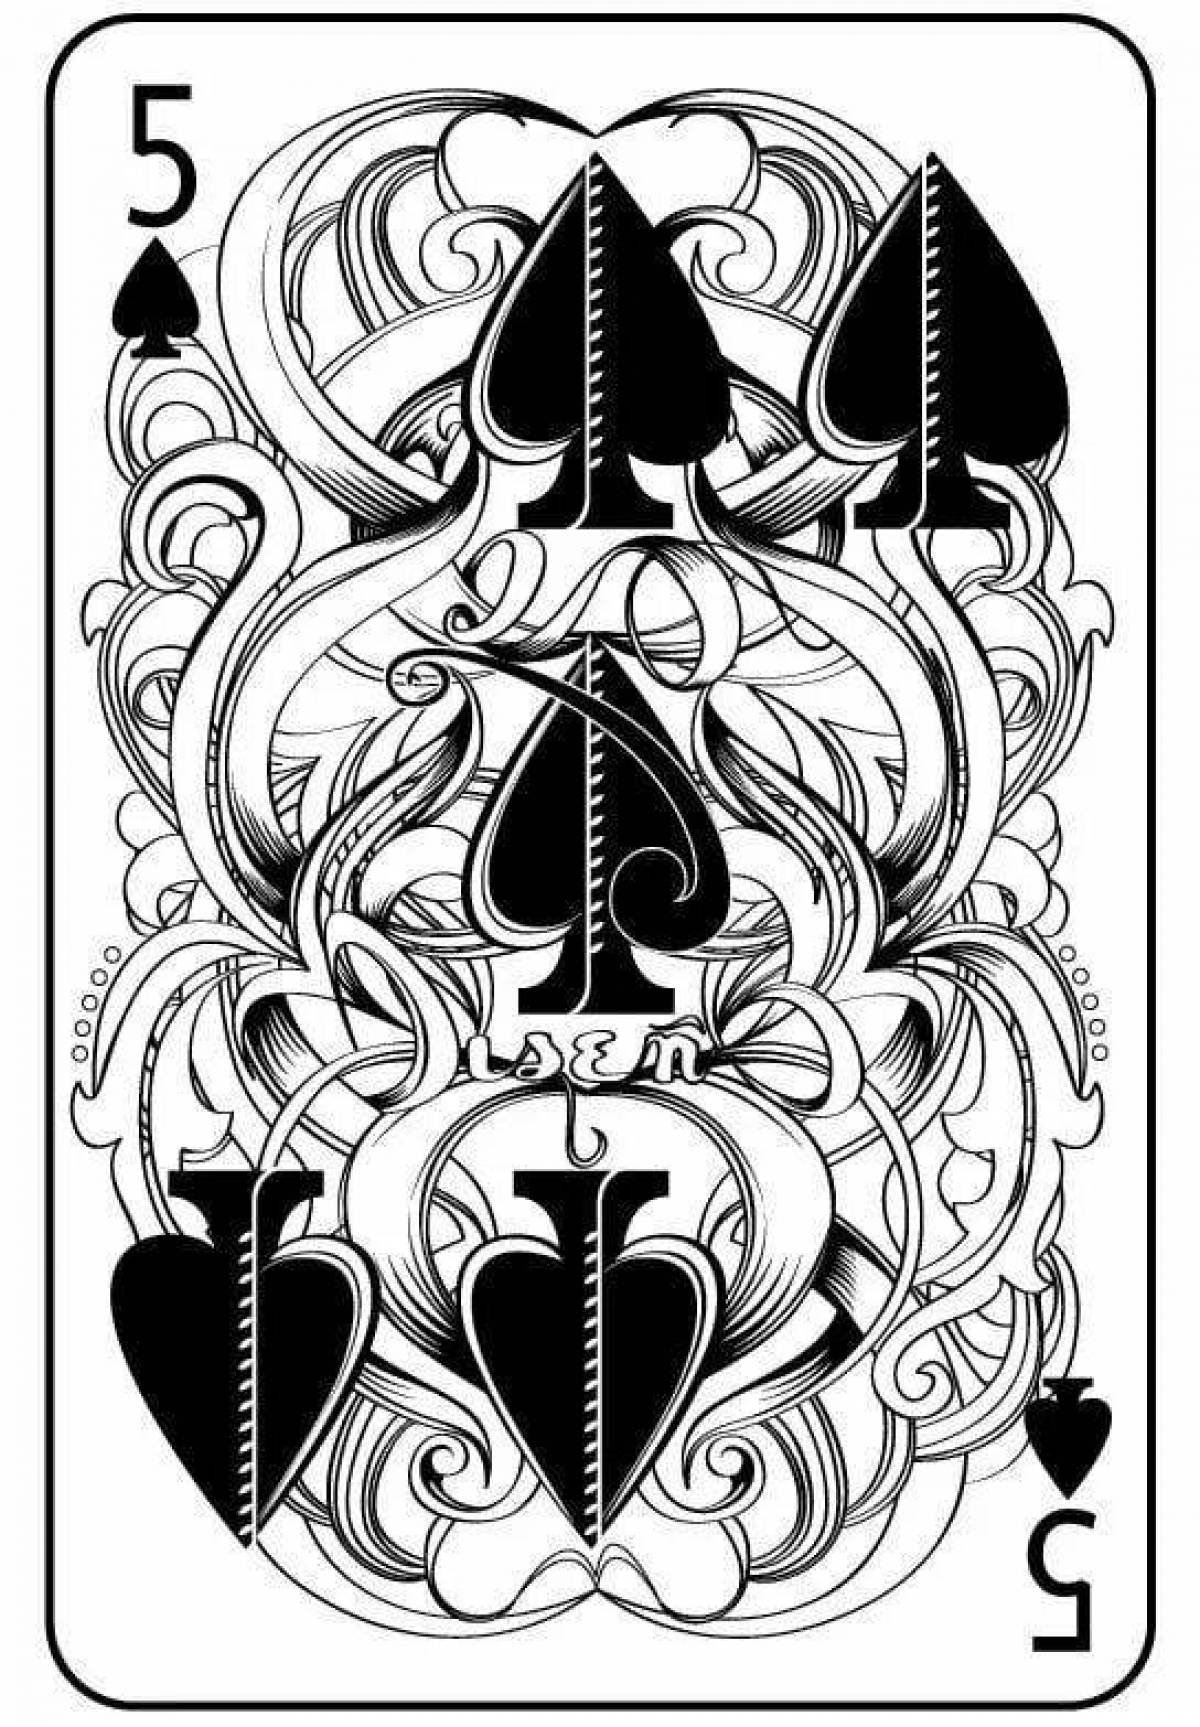 Playing cards #4